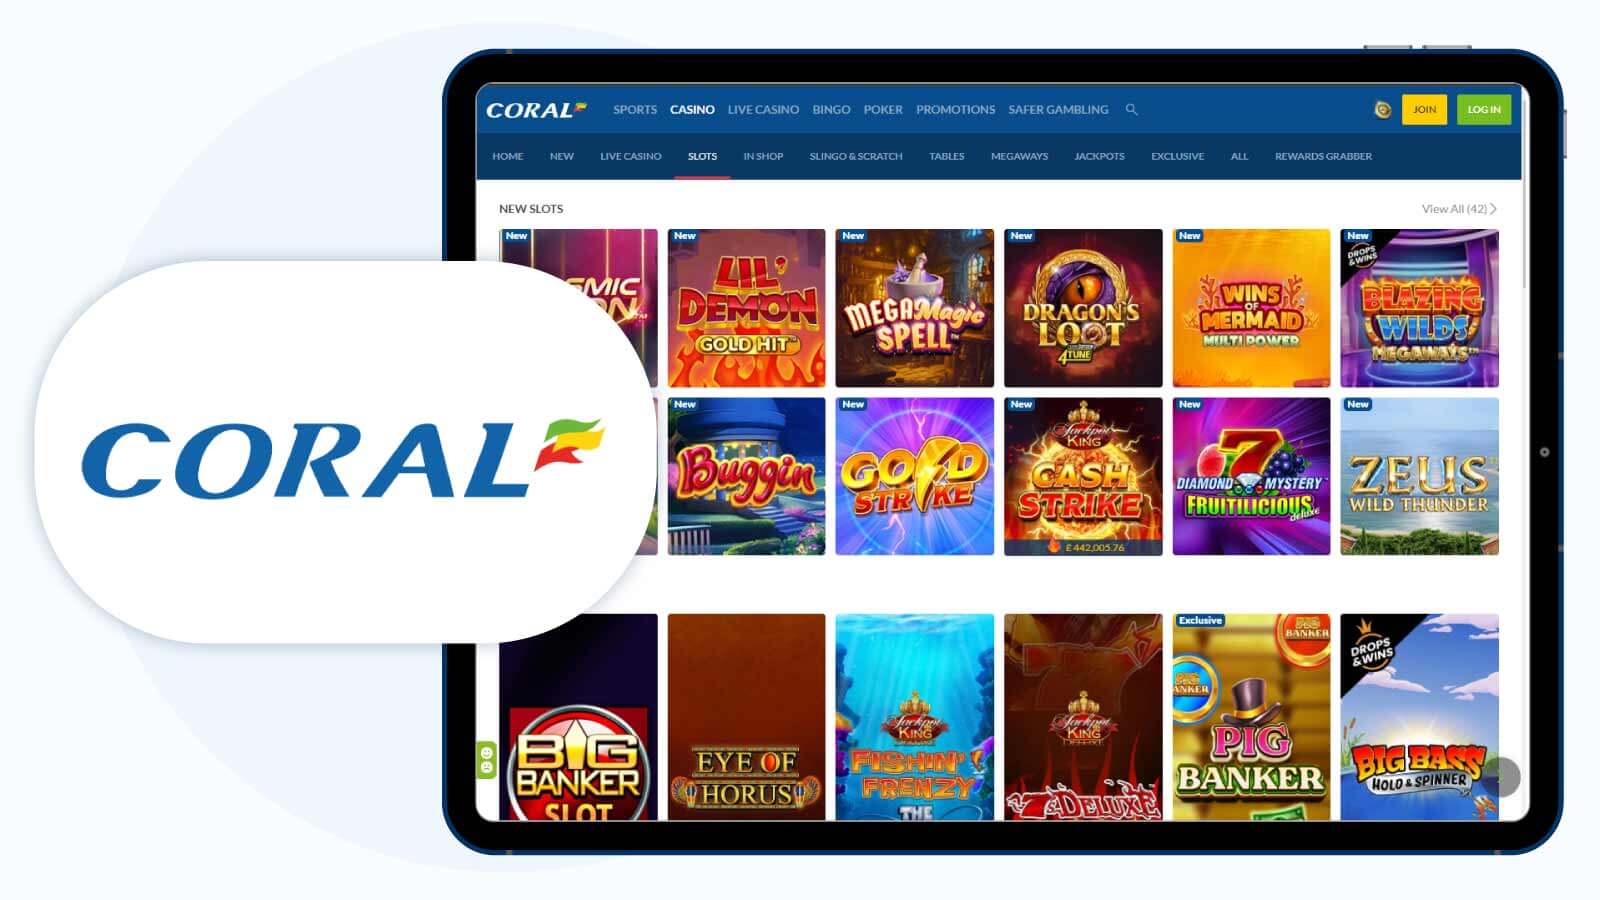 Coral Casino Beat The Banker and get Free Spins as An Existing Customer